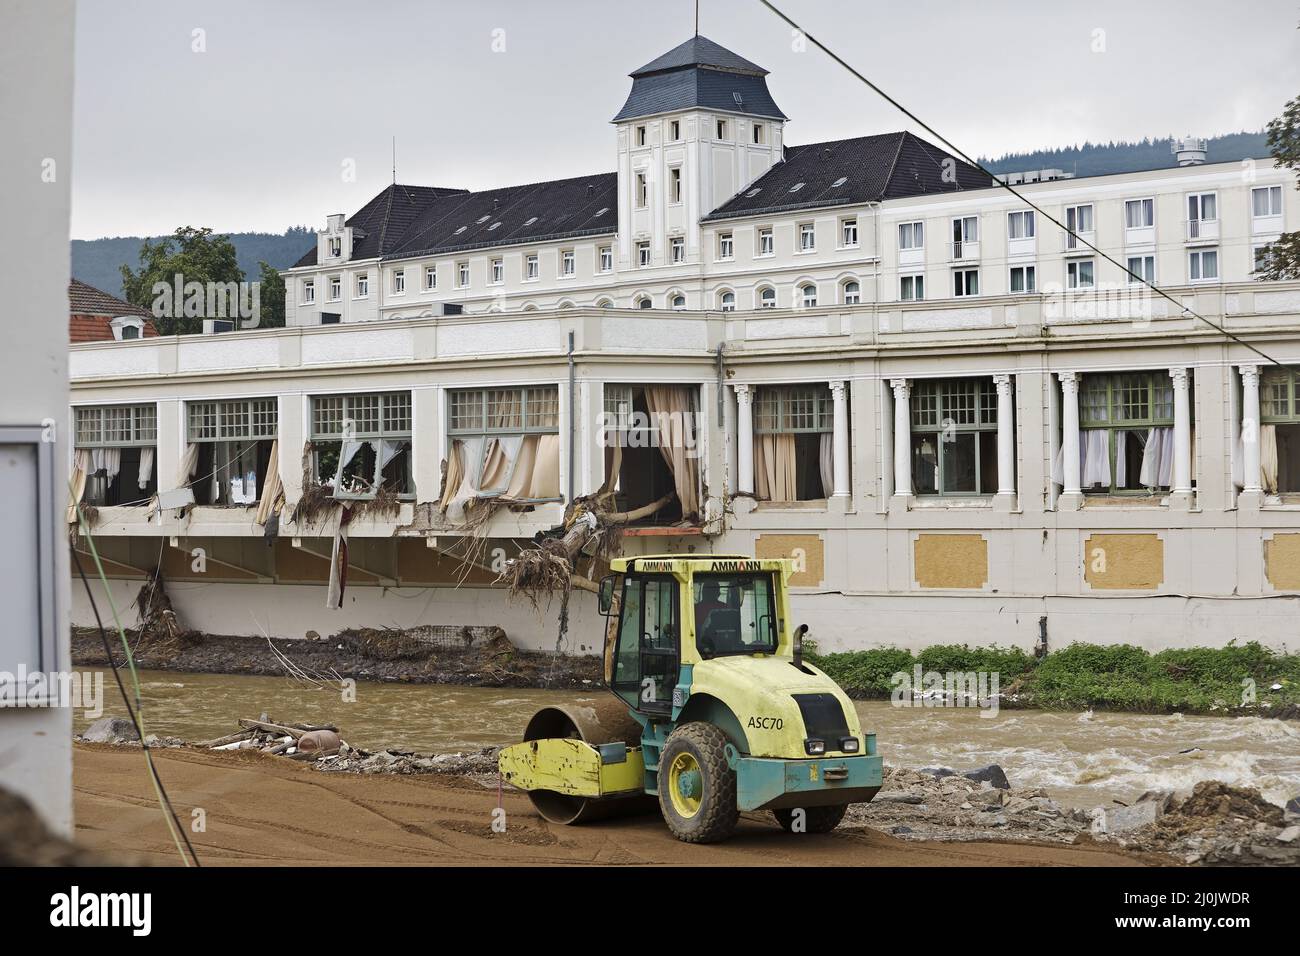 Flood disaster 2021, cleaning up work on the Kurhaus on the river Ahr, Bad Neuenahr, Germany, Europe Stock Photo